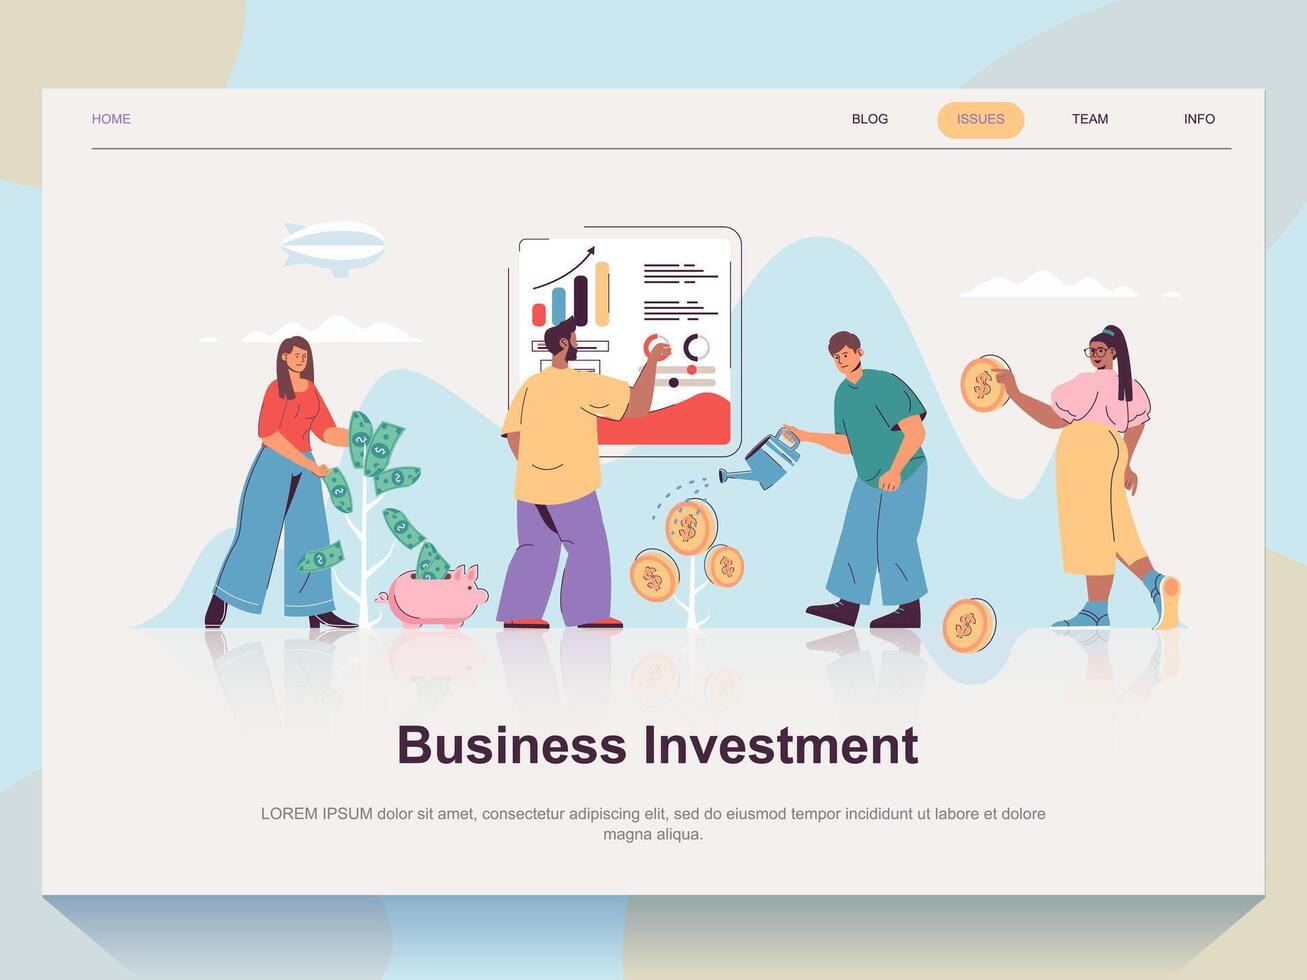 Business investment web concept for landing page in flat design. Man and woman analyzing statistics and investing money in success project. Vector illustration with people scene for website homepage